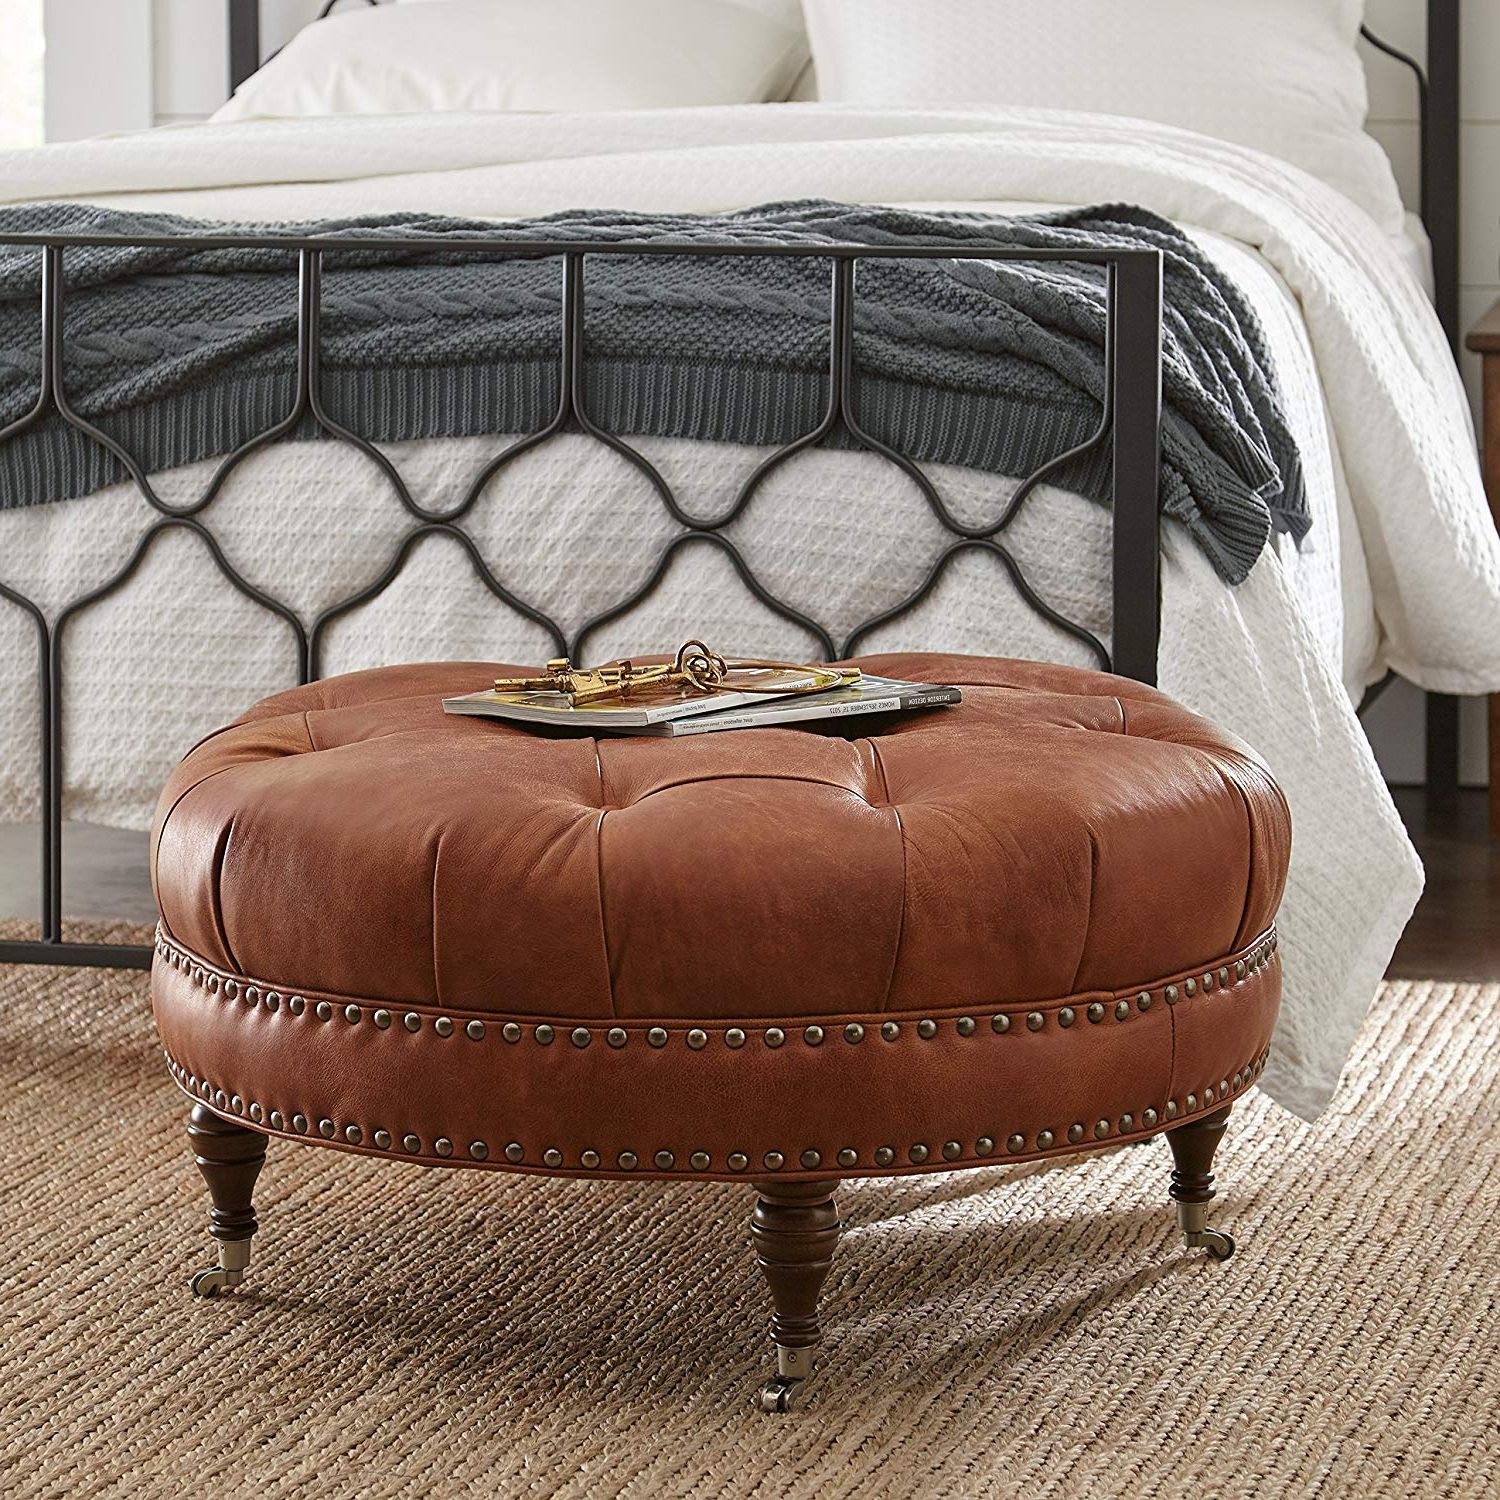 Button Tufted Round Leather Wheeled Ottoman With Spindled Wooden Legs Inside Latest Tufted Ottomans (View 1 of 10)